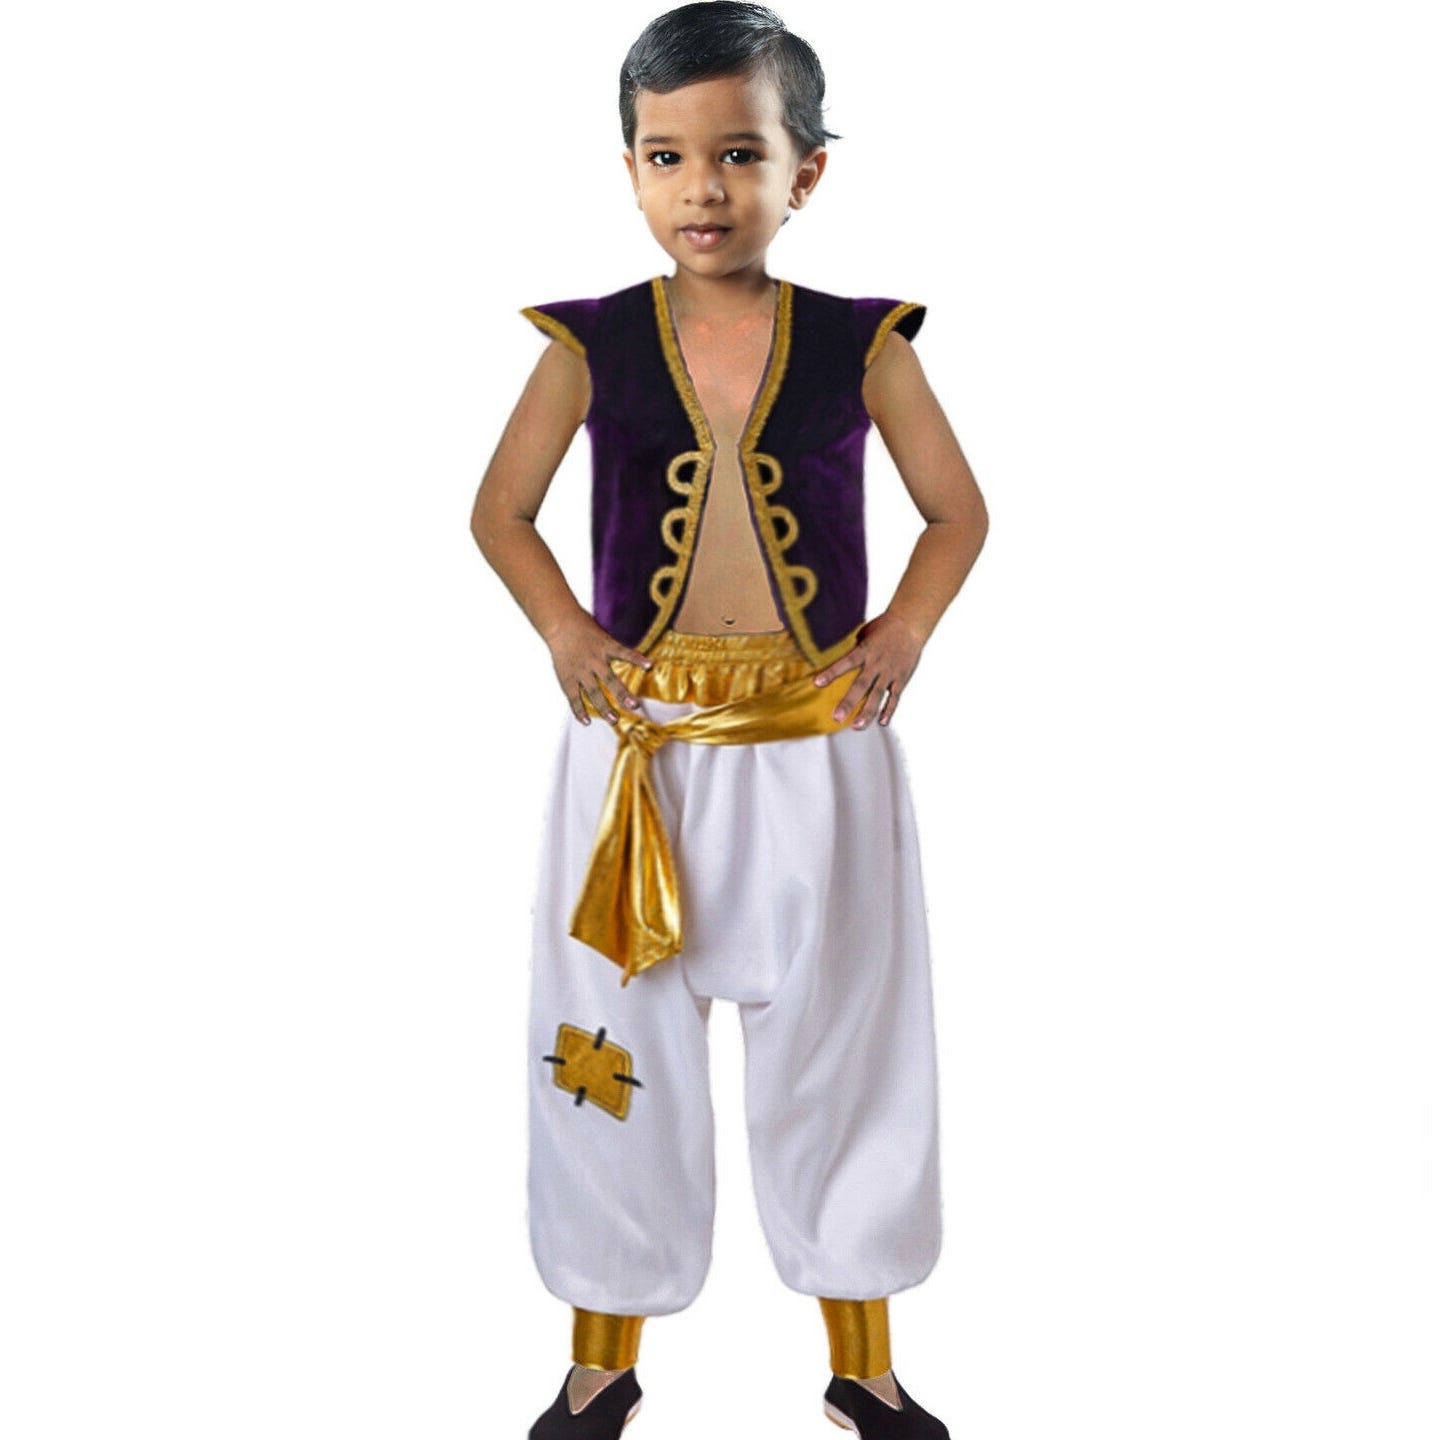 Cultural Appropriation And Kids Halloween Costumes A Parents Guide